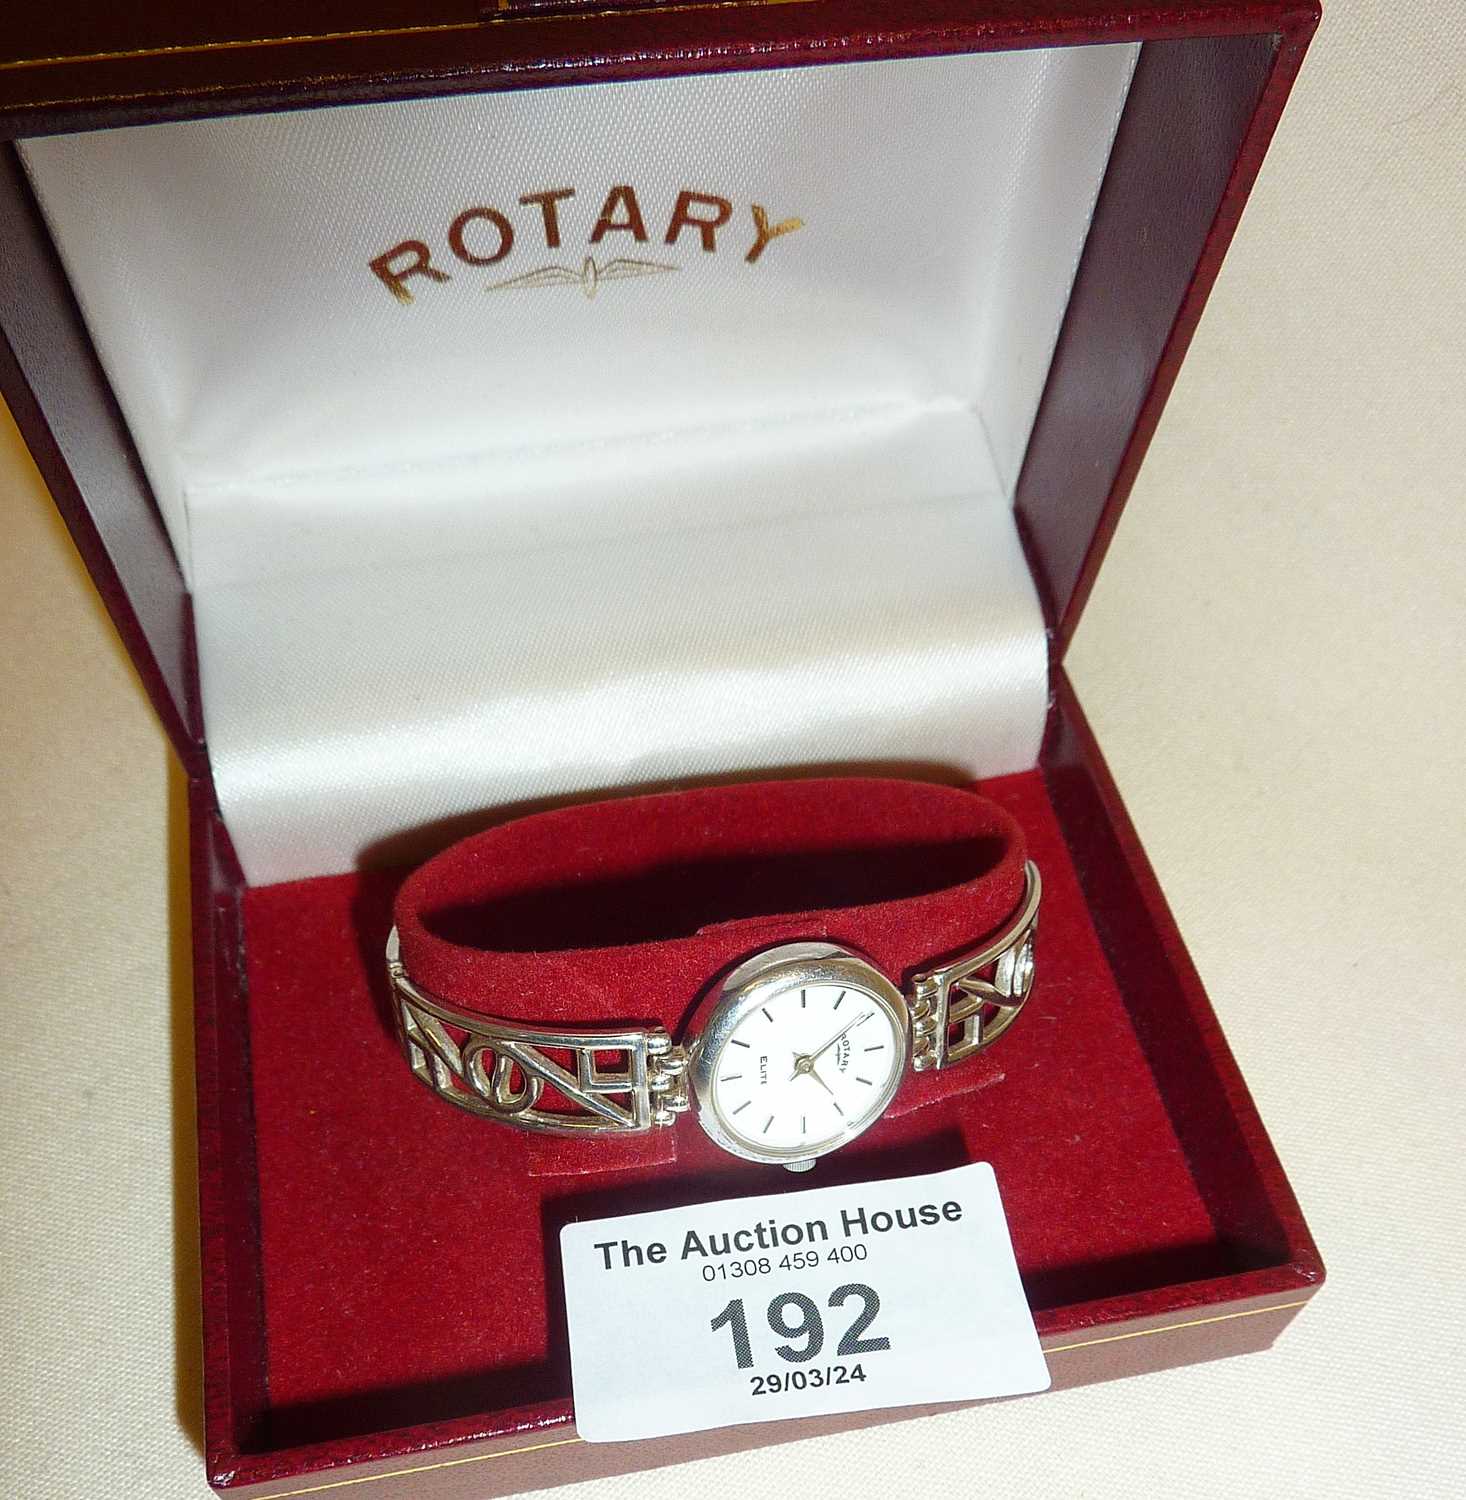 Ladies' Sterling silver Rotary watch in case, very good condition and working - Image 2 of 2